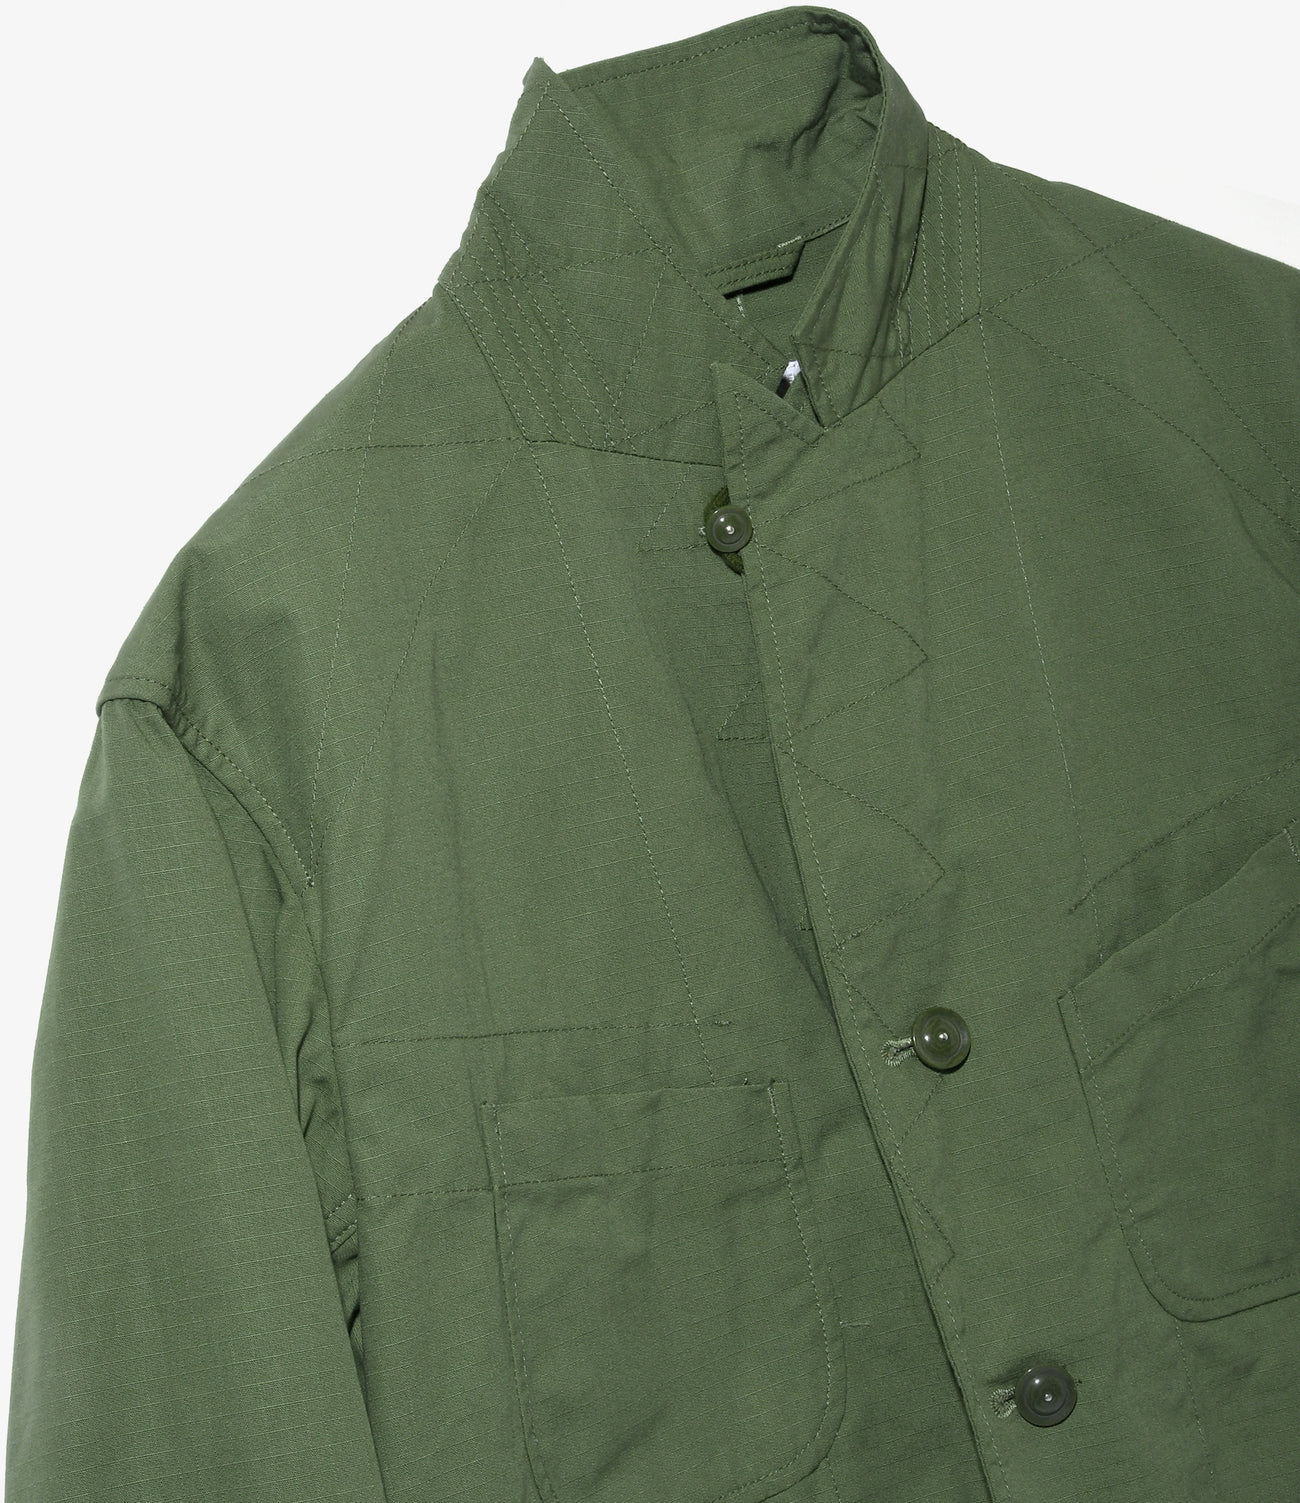 Engineered Garments Bedford Jacket - Olive Cotton Ripstop